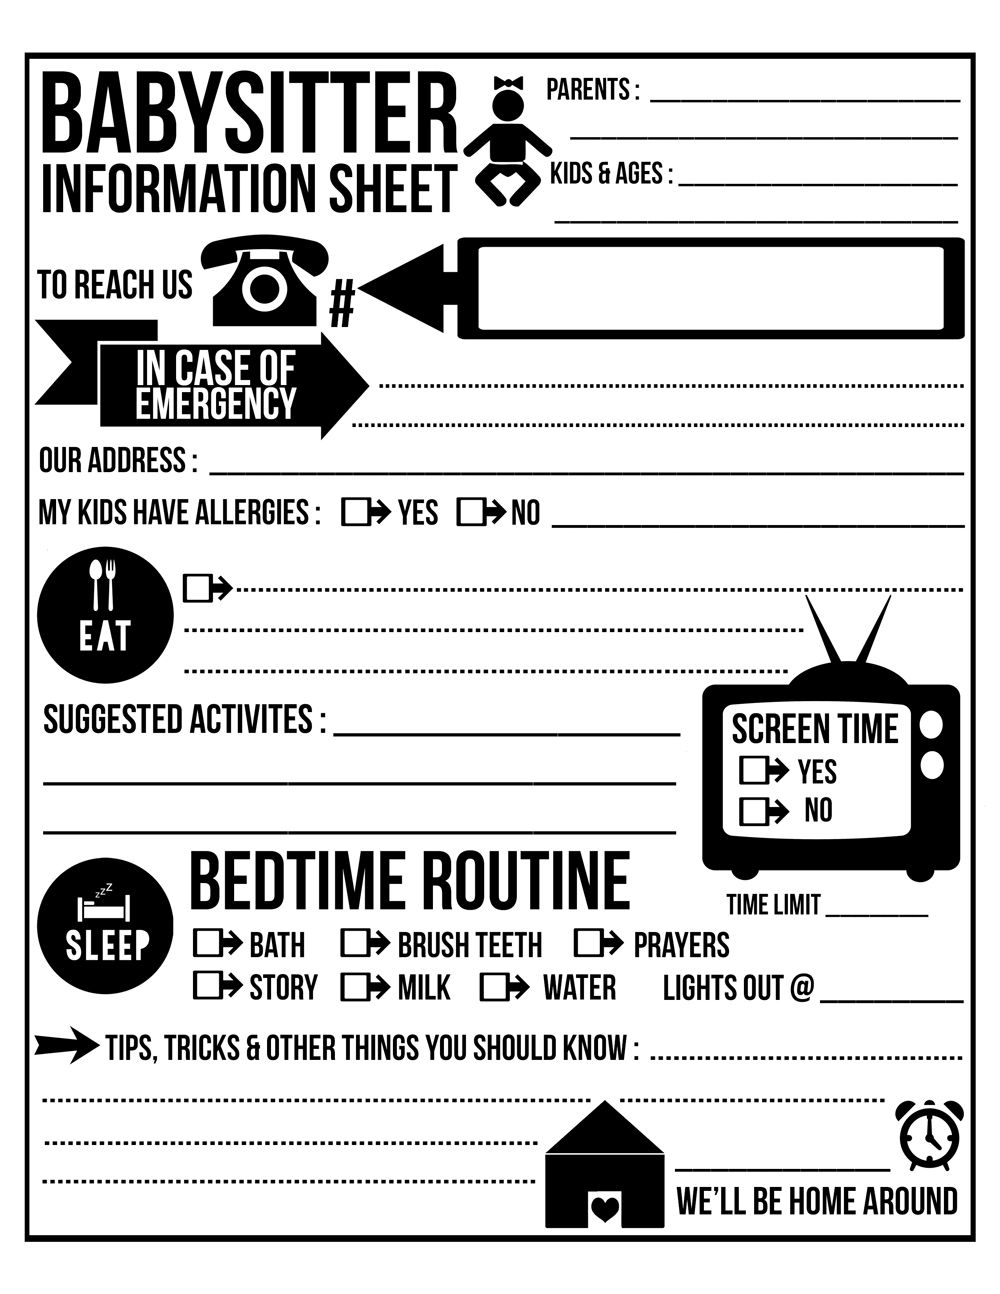 Free Printable Babysitter Info Sheet. Frame Or Laminate And Use A - Free Printable Parent Information Sheet